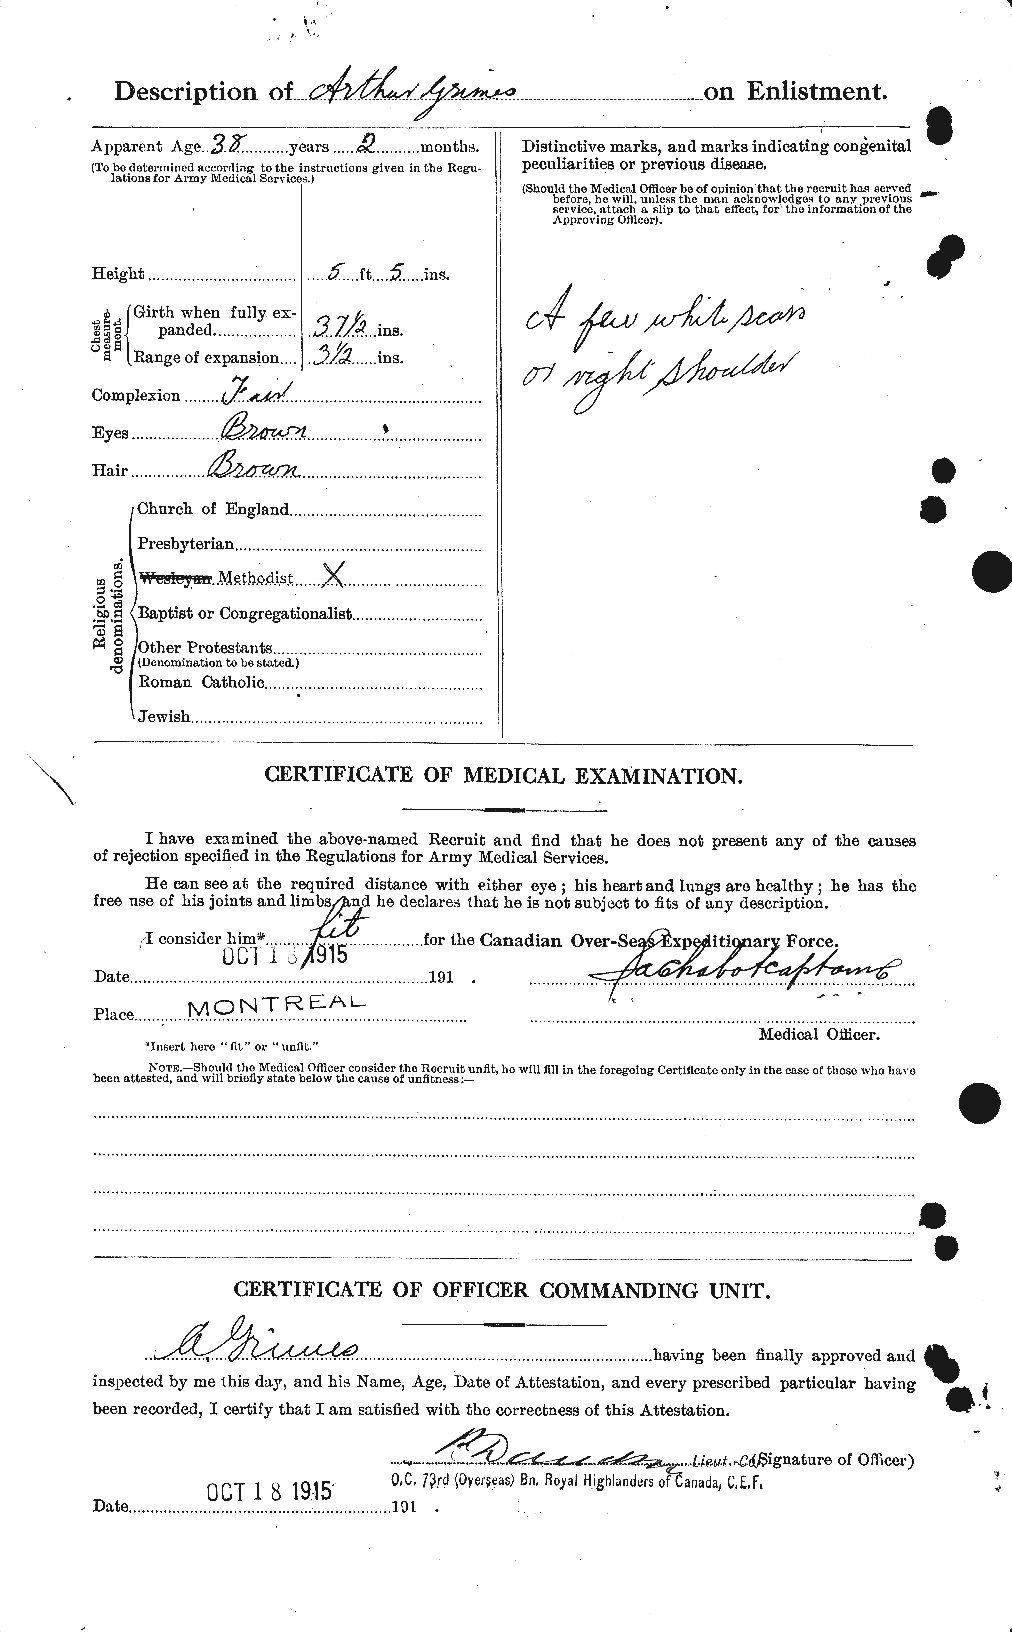 Personnel Records of the First World War - CEF 366009b